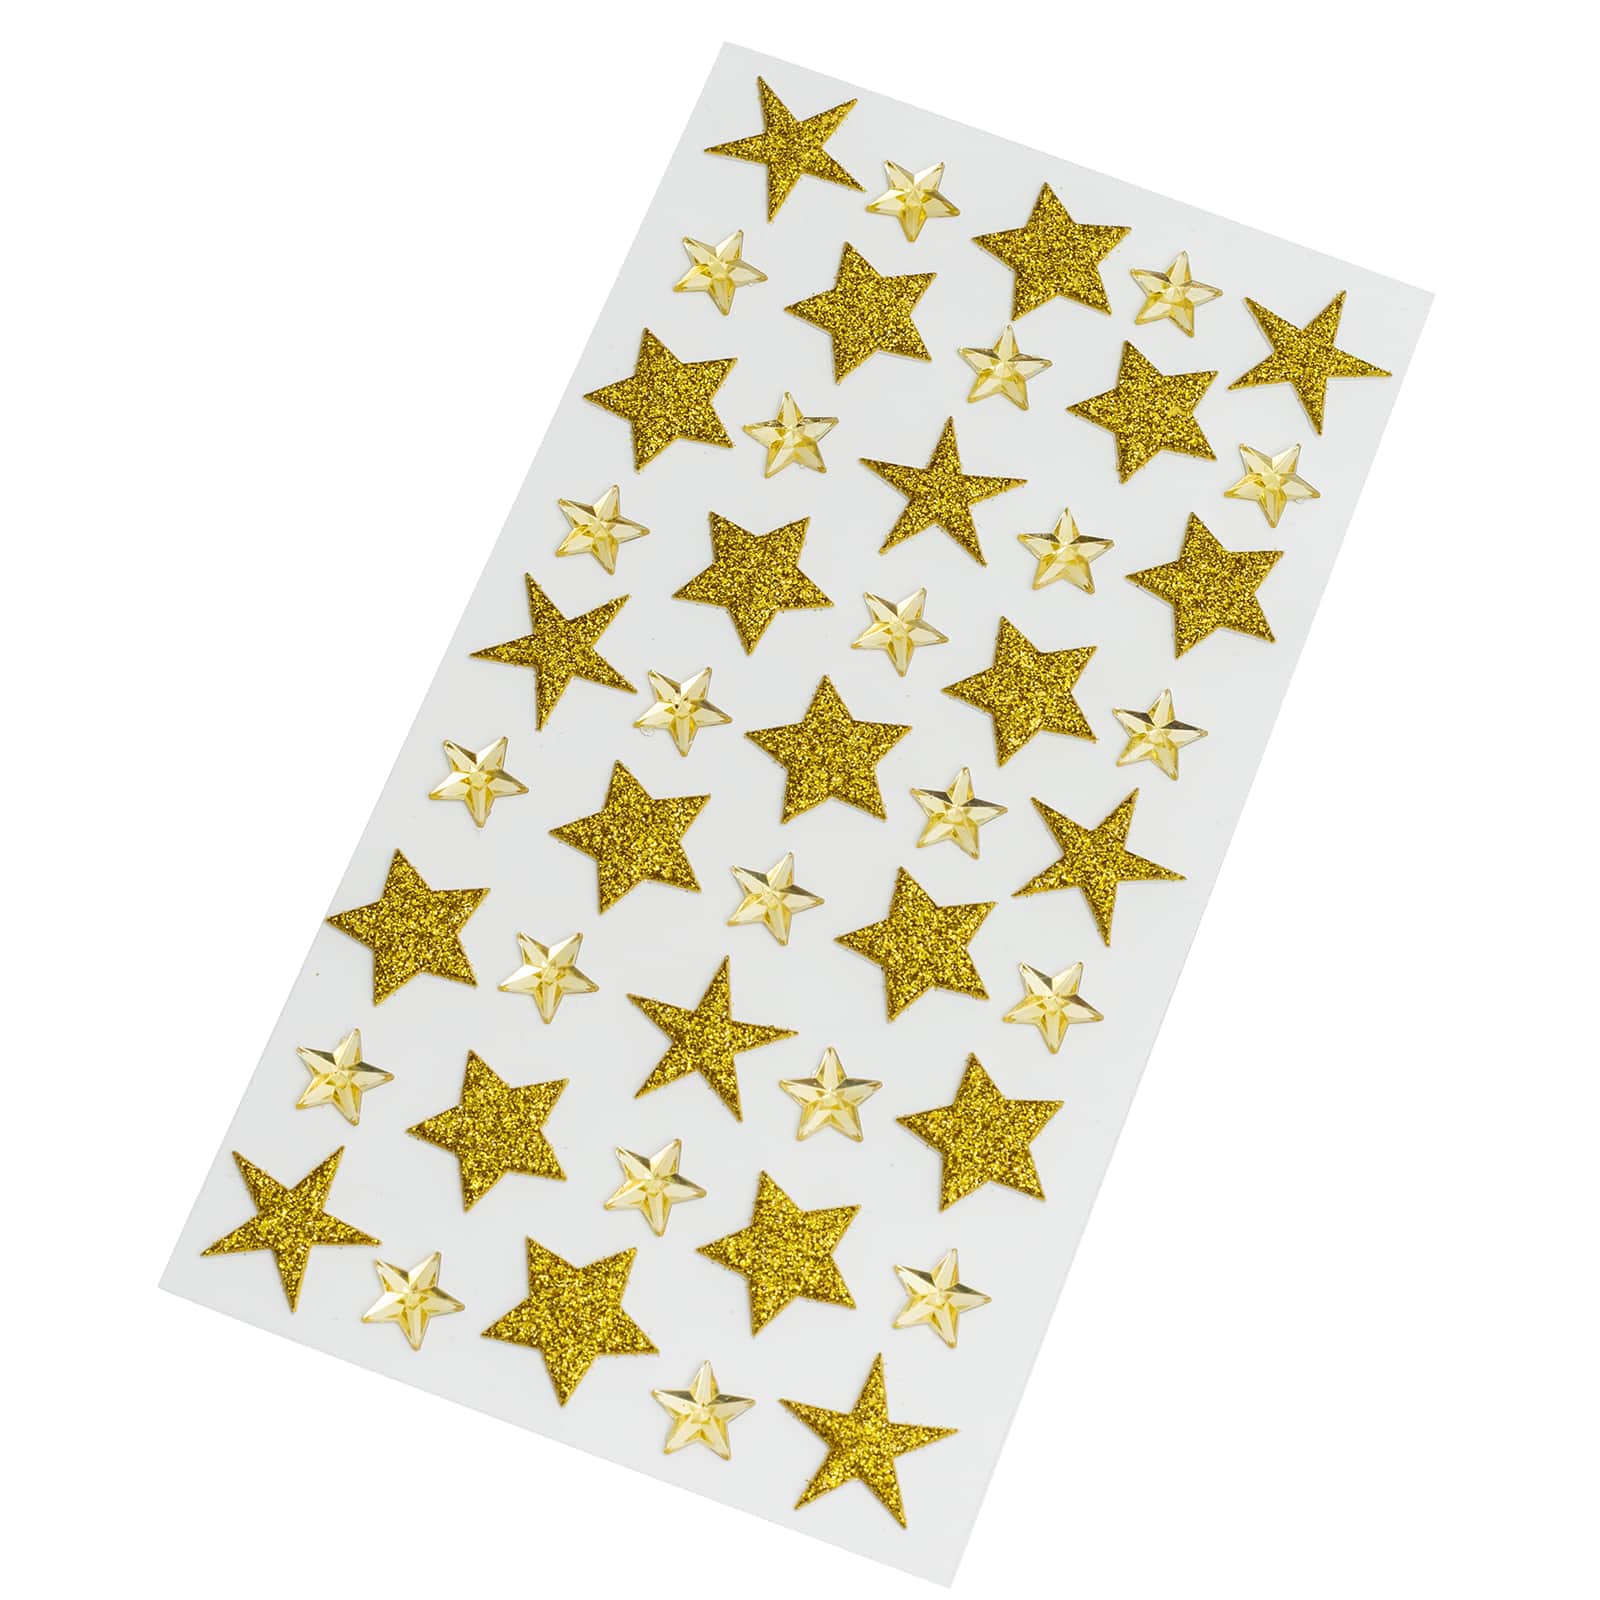 12 Packs: 45 Ct. (540 Total) Gold Glitter Star Stickers by Recollections, Size: 8.5” x 0.06” x 4”